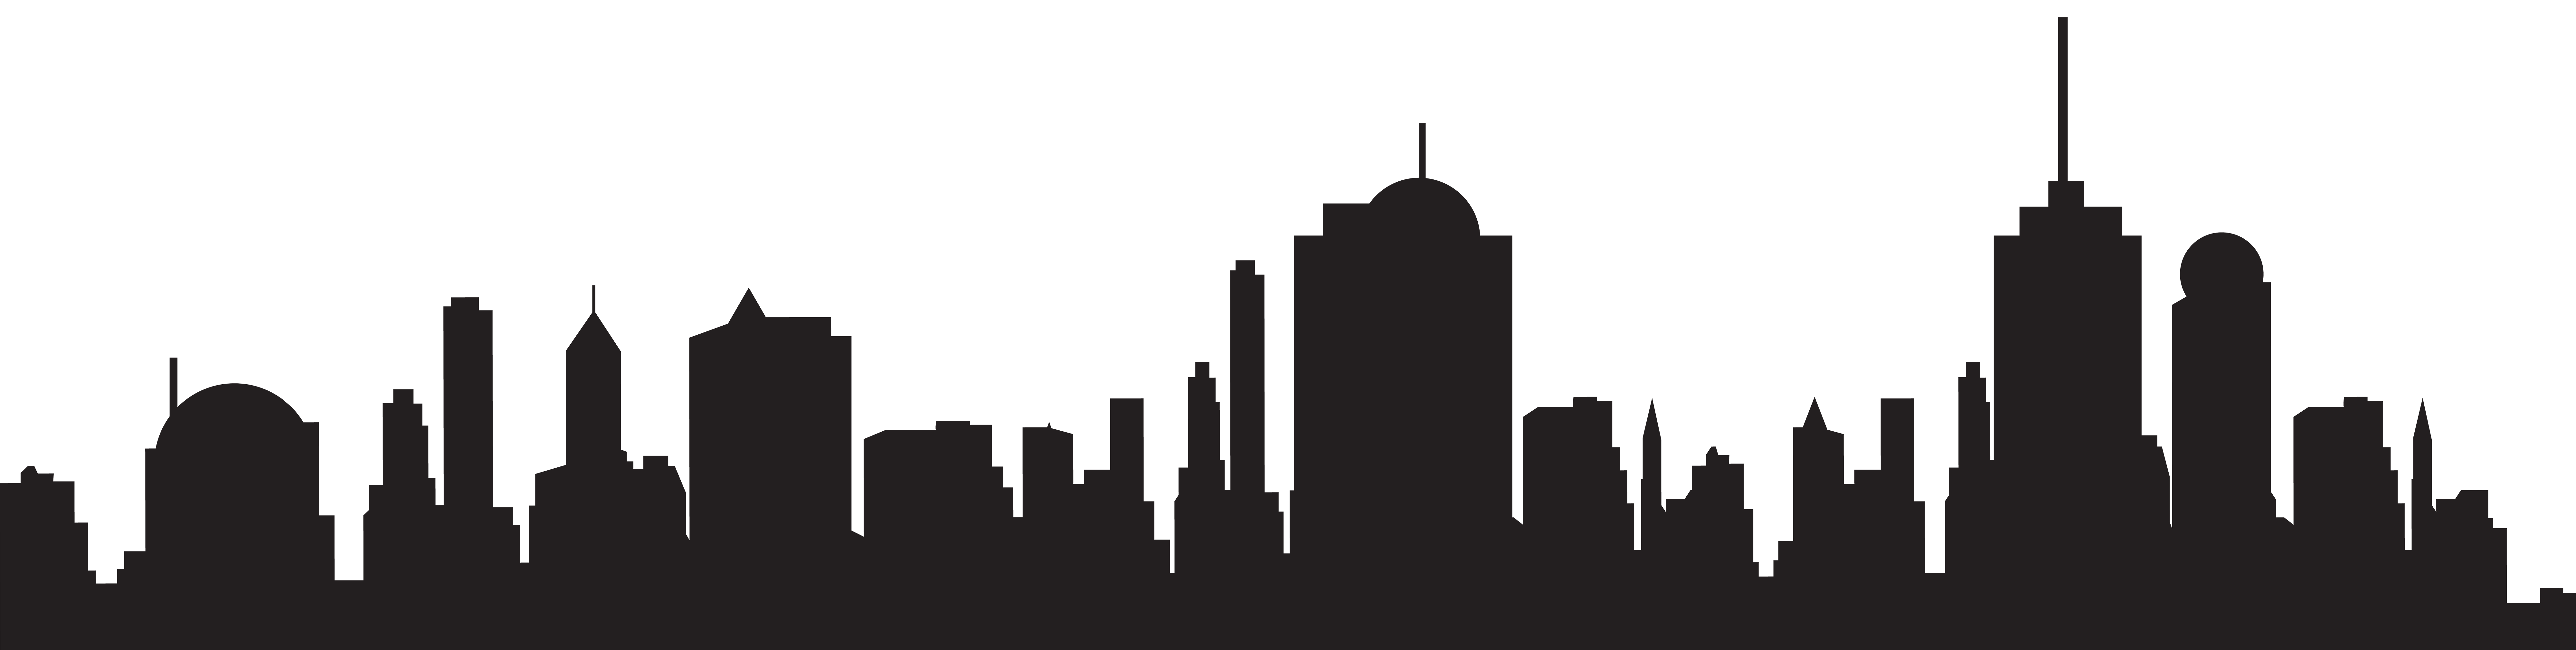 New York City Silhouette Skyline City Silhouette Png Clip Art Png